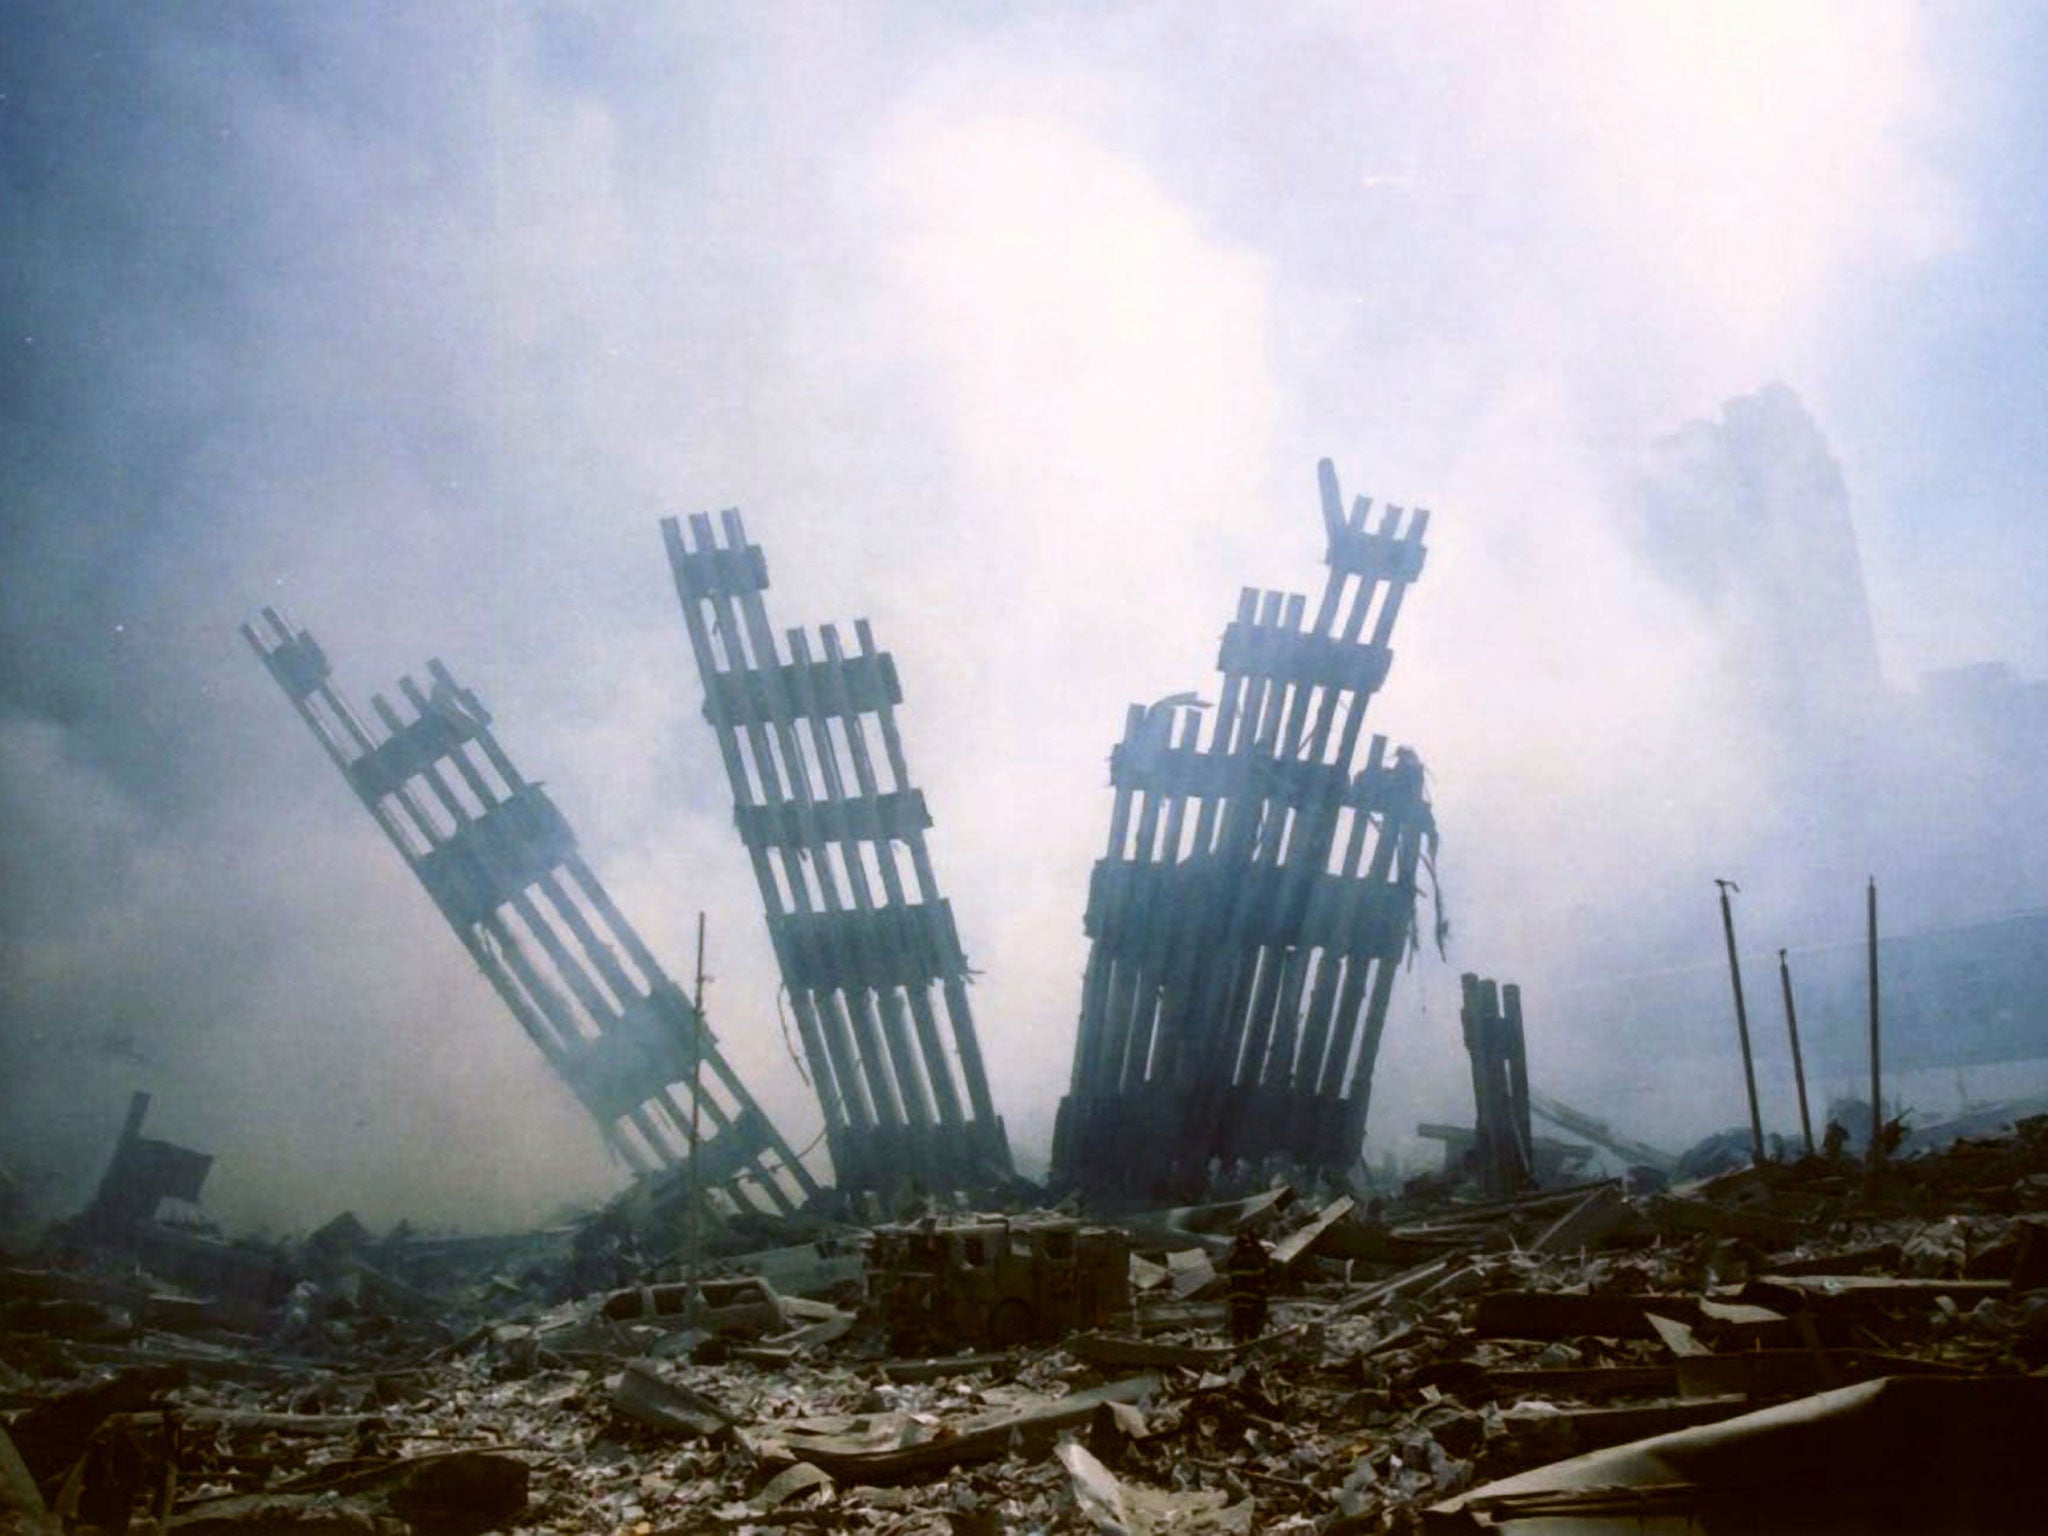 The remains of the World Trade Center stands amid the debris following the terrorist attack on the building in New York